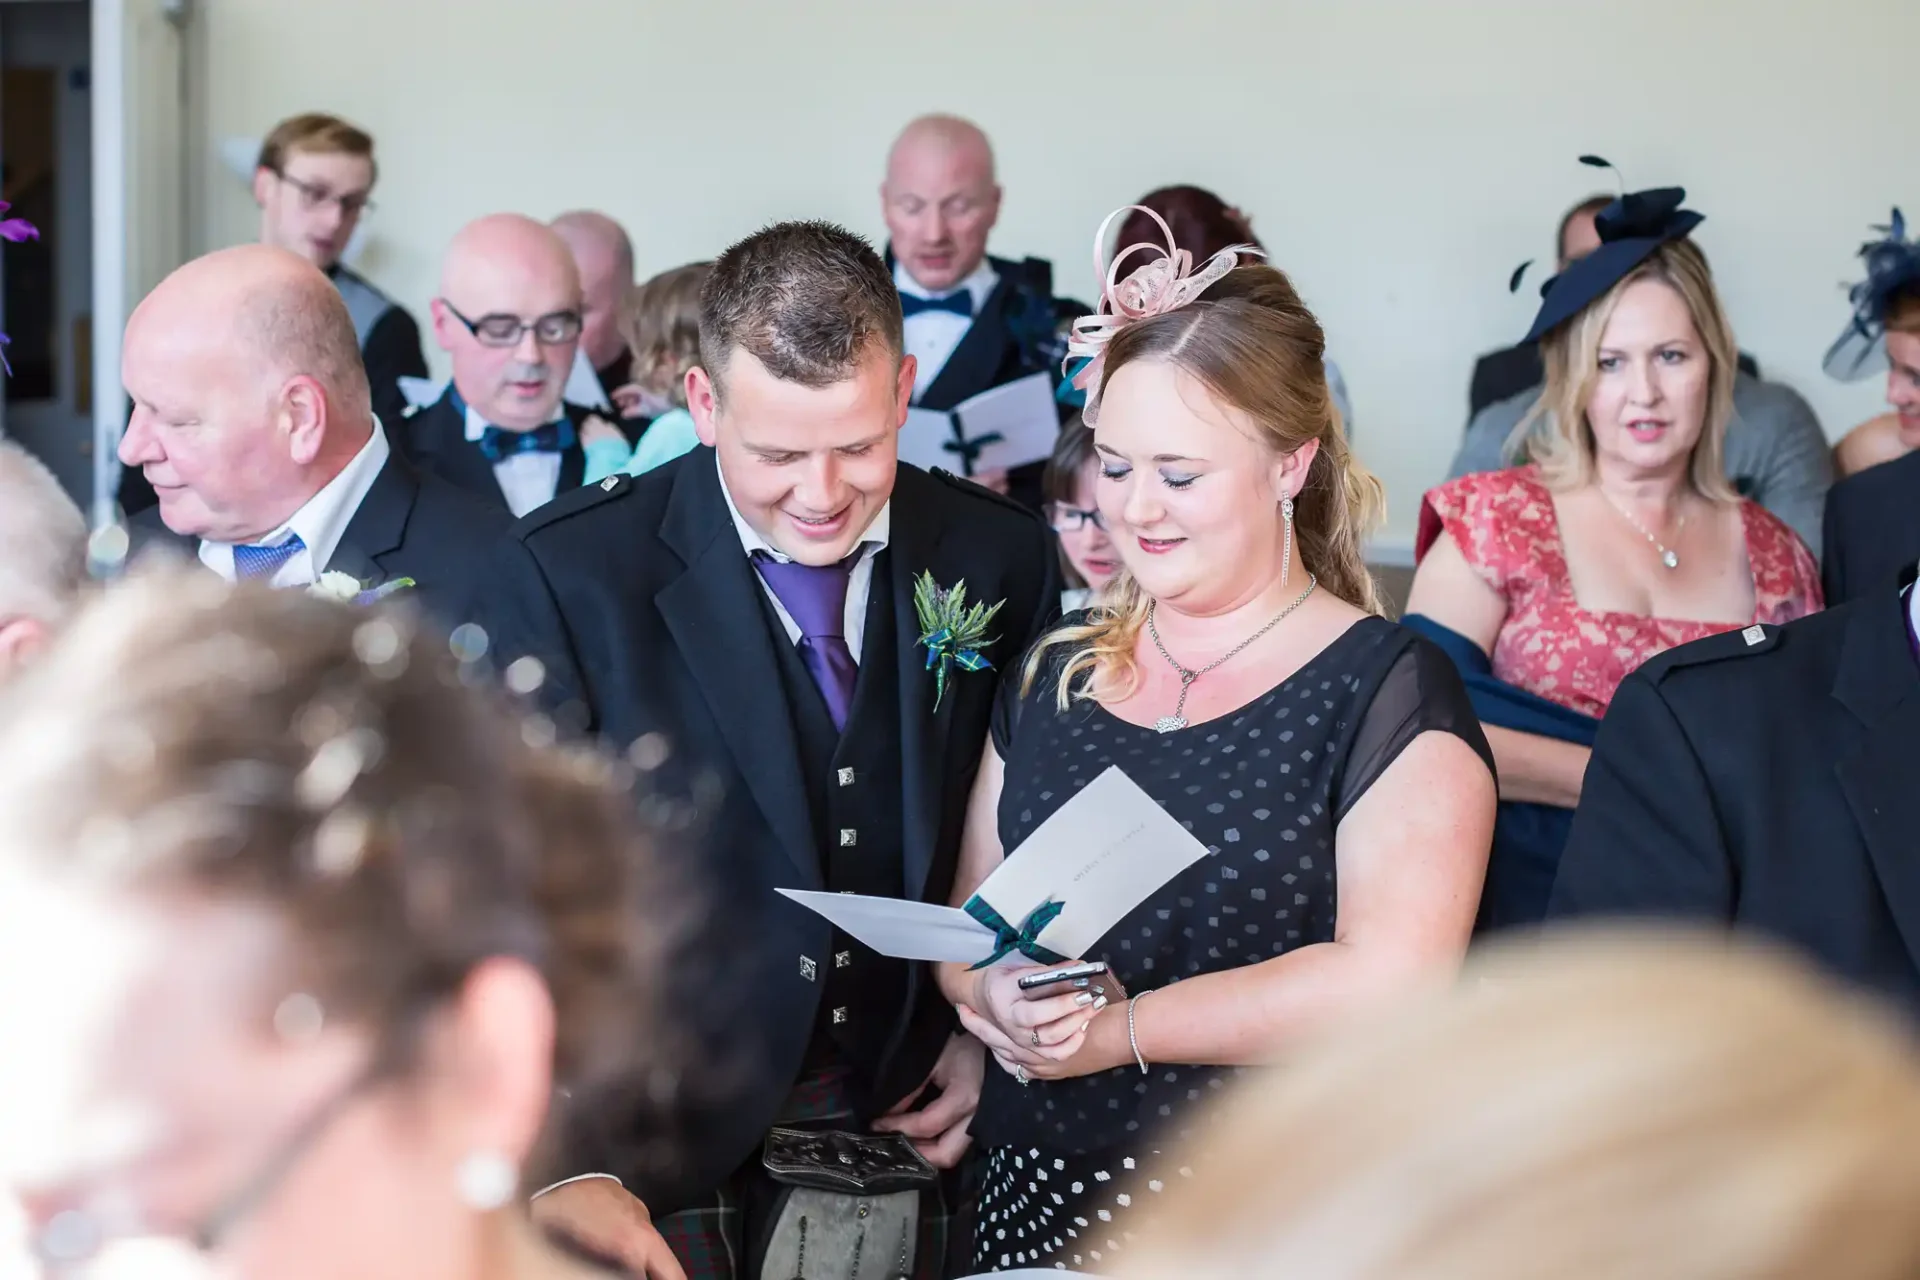 A couple reads a document together at a wedding, surrounded by guests in formal attire.